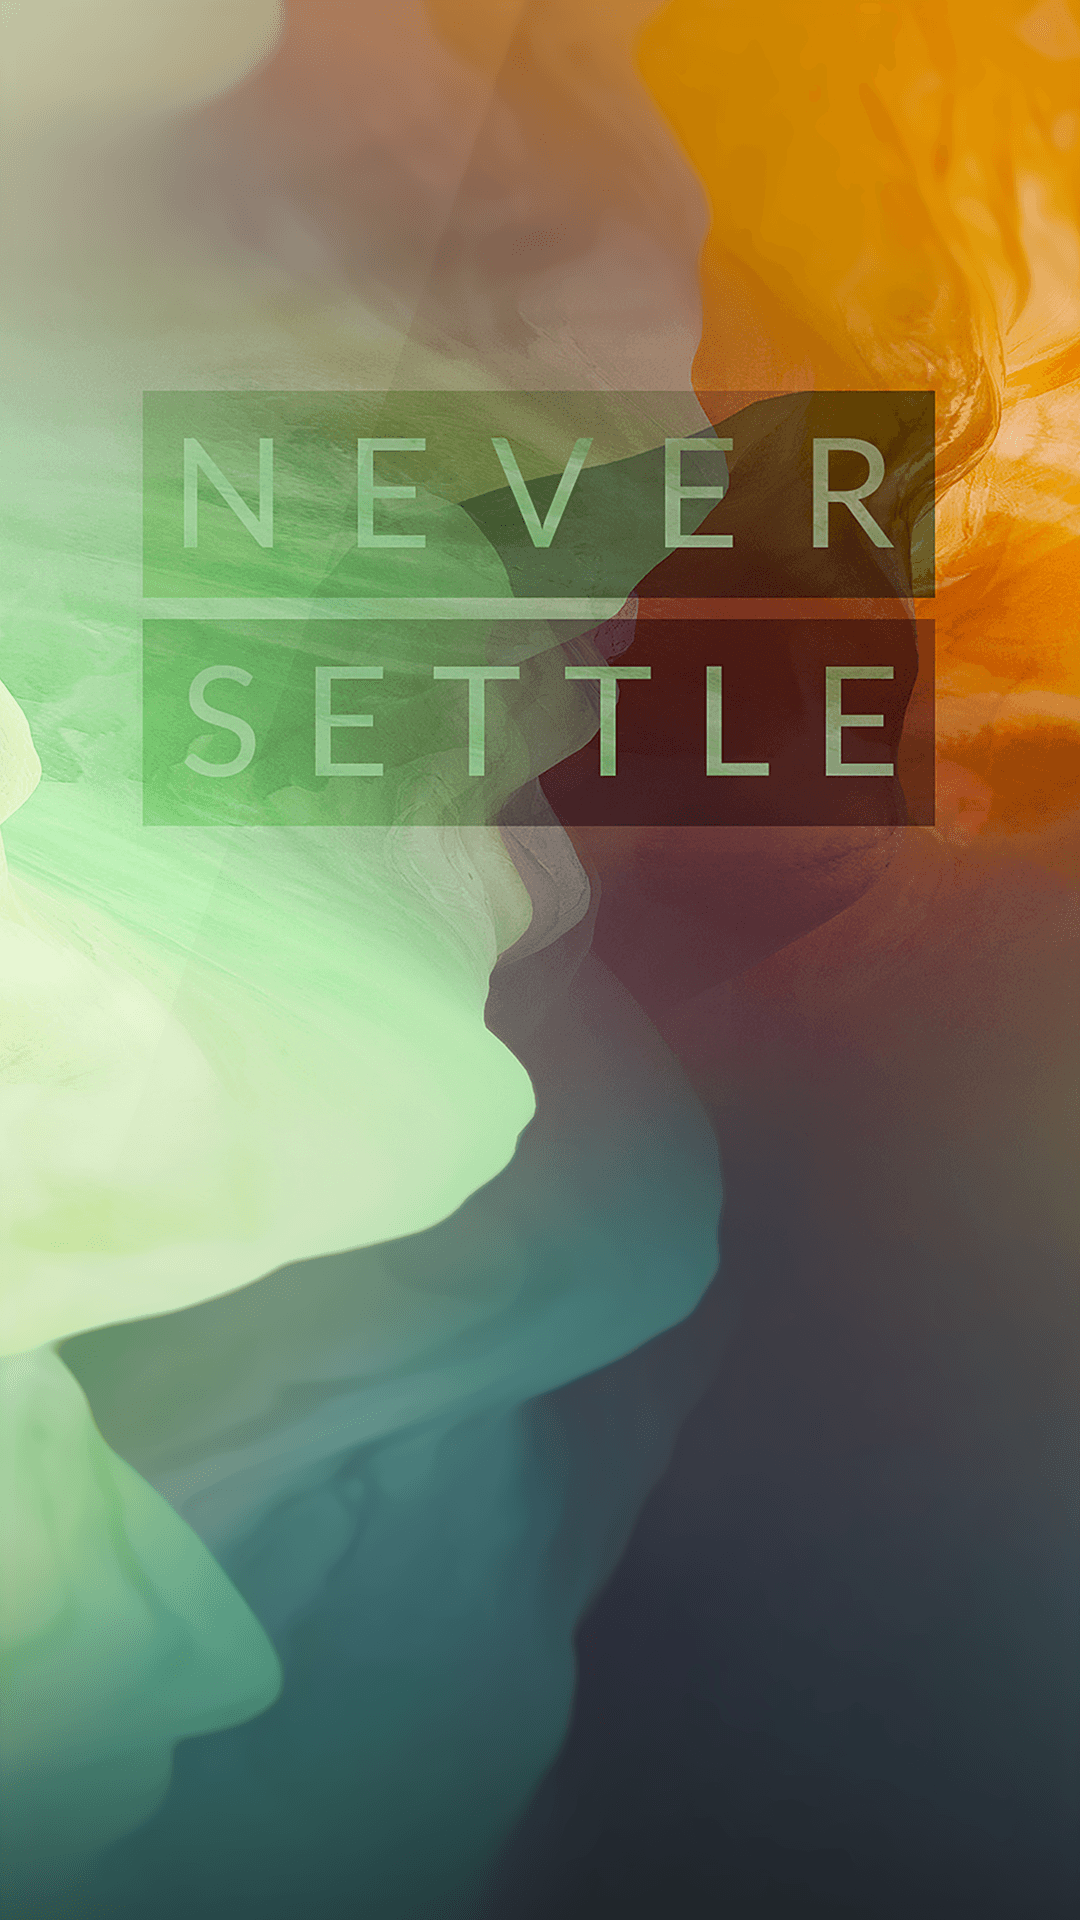 OnePlus two OS Wallpaper×1080. Never settle